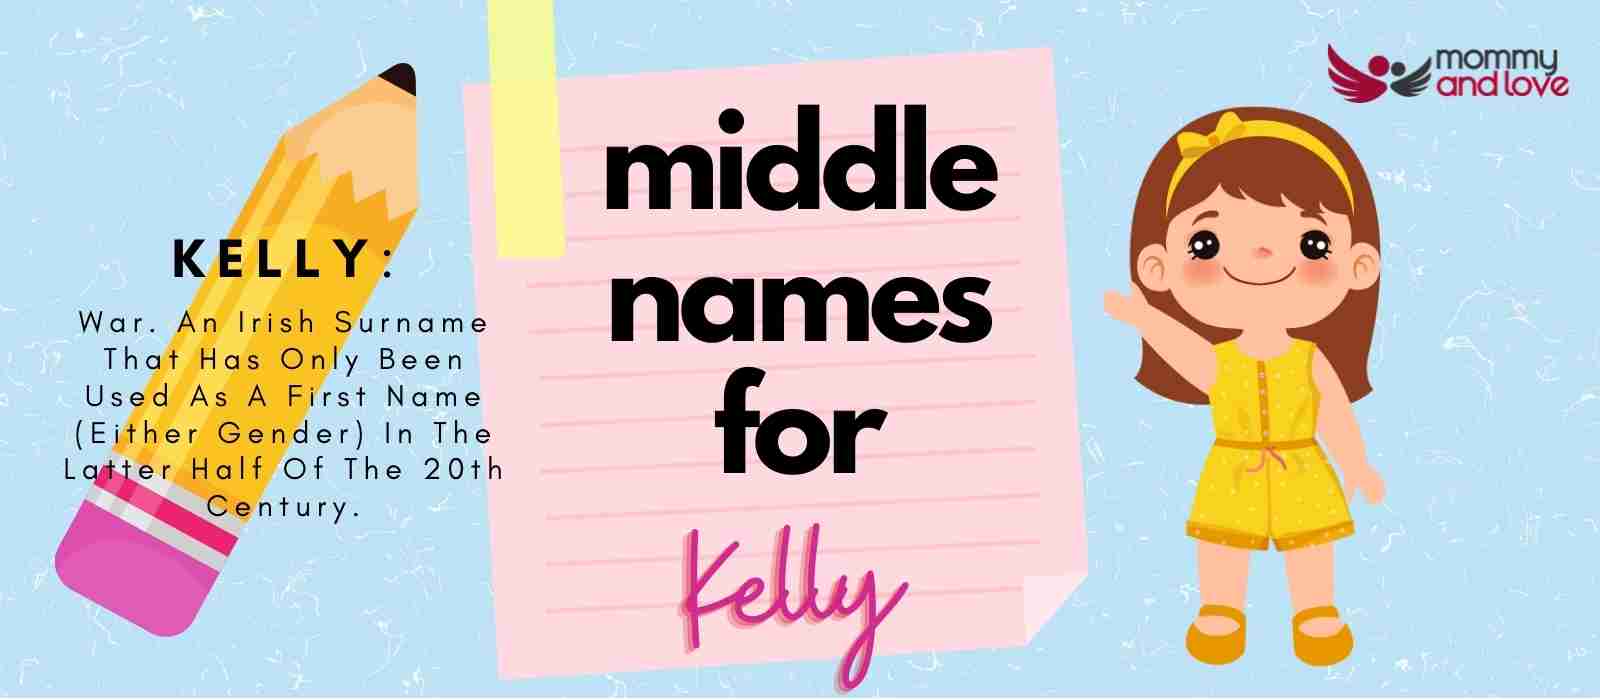 Middle Names for Kelly